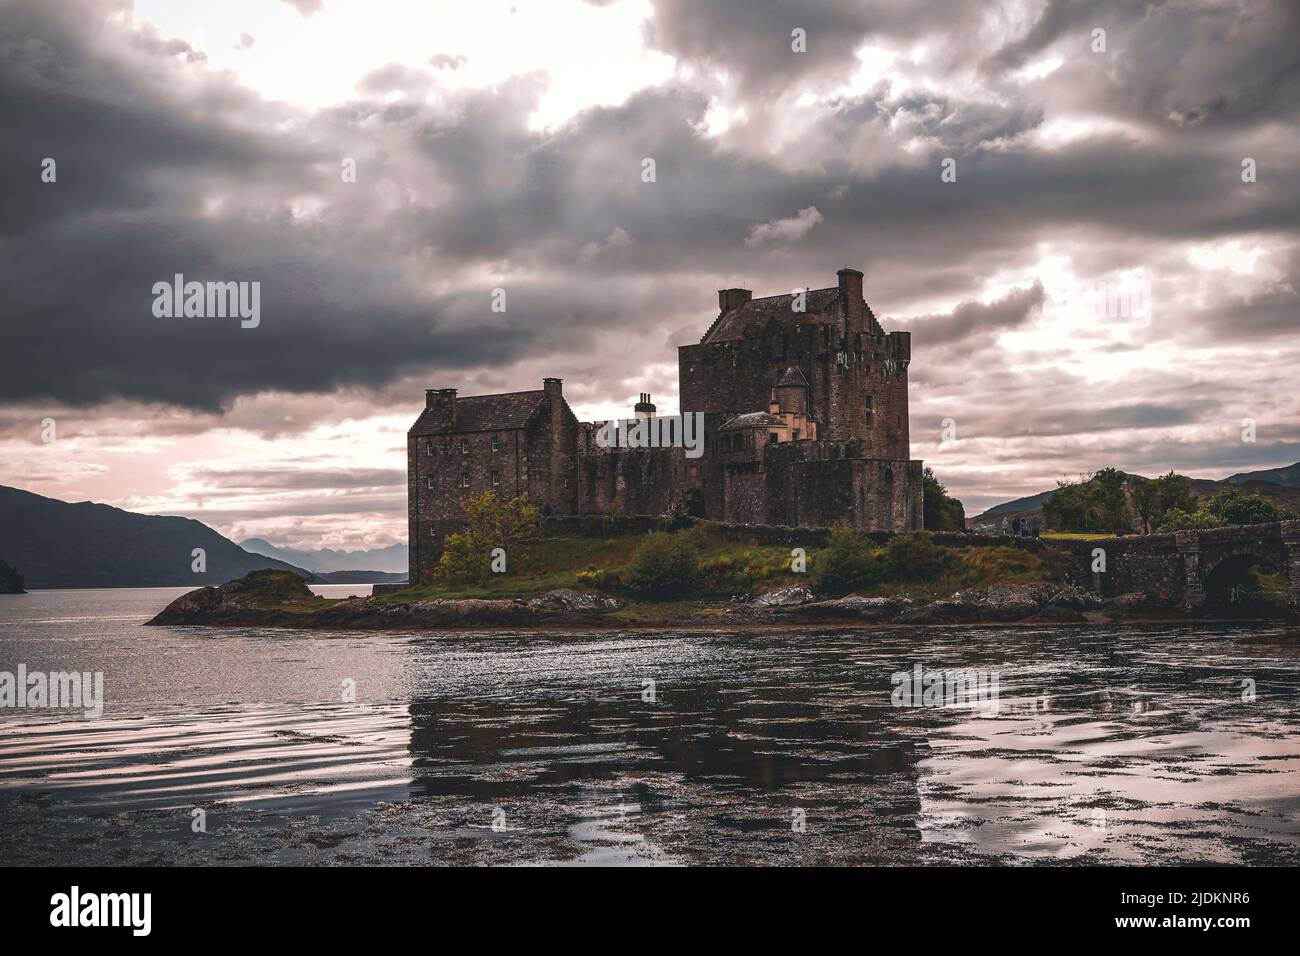 A photograph taken just before sunset at Eilean Donan Castle, in beautiful Scotland. Stock Photo